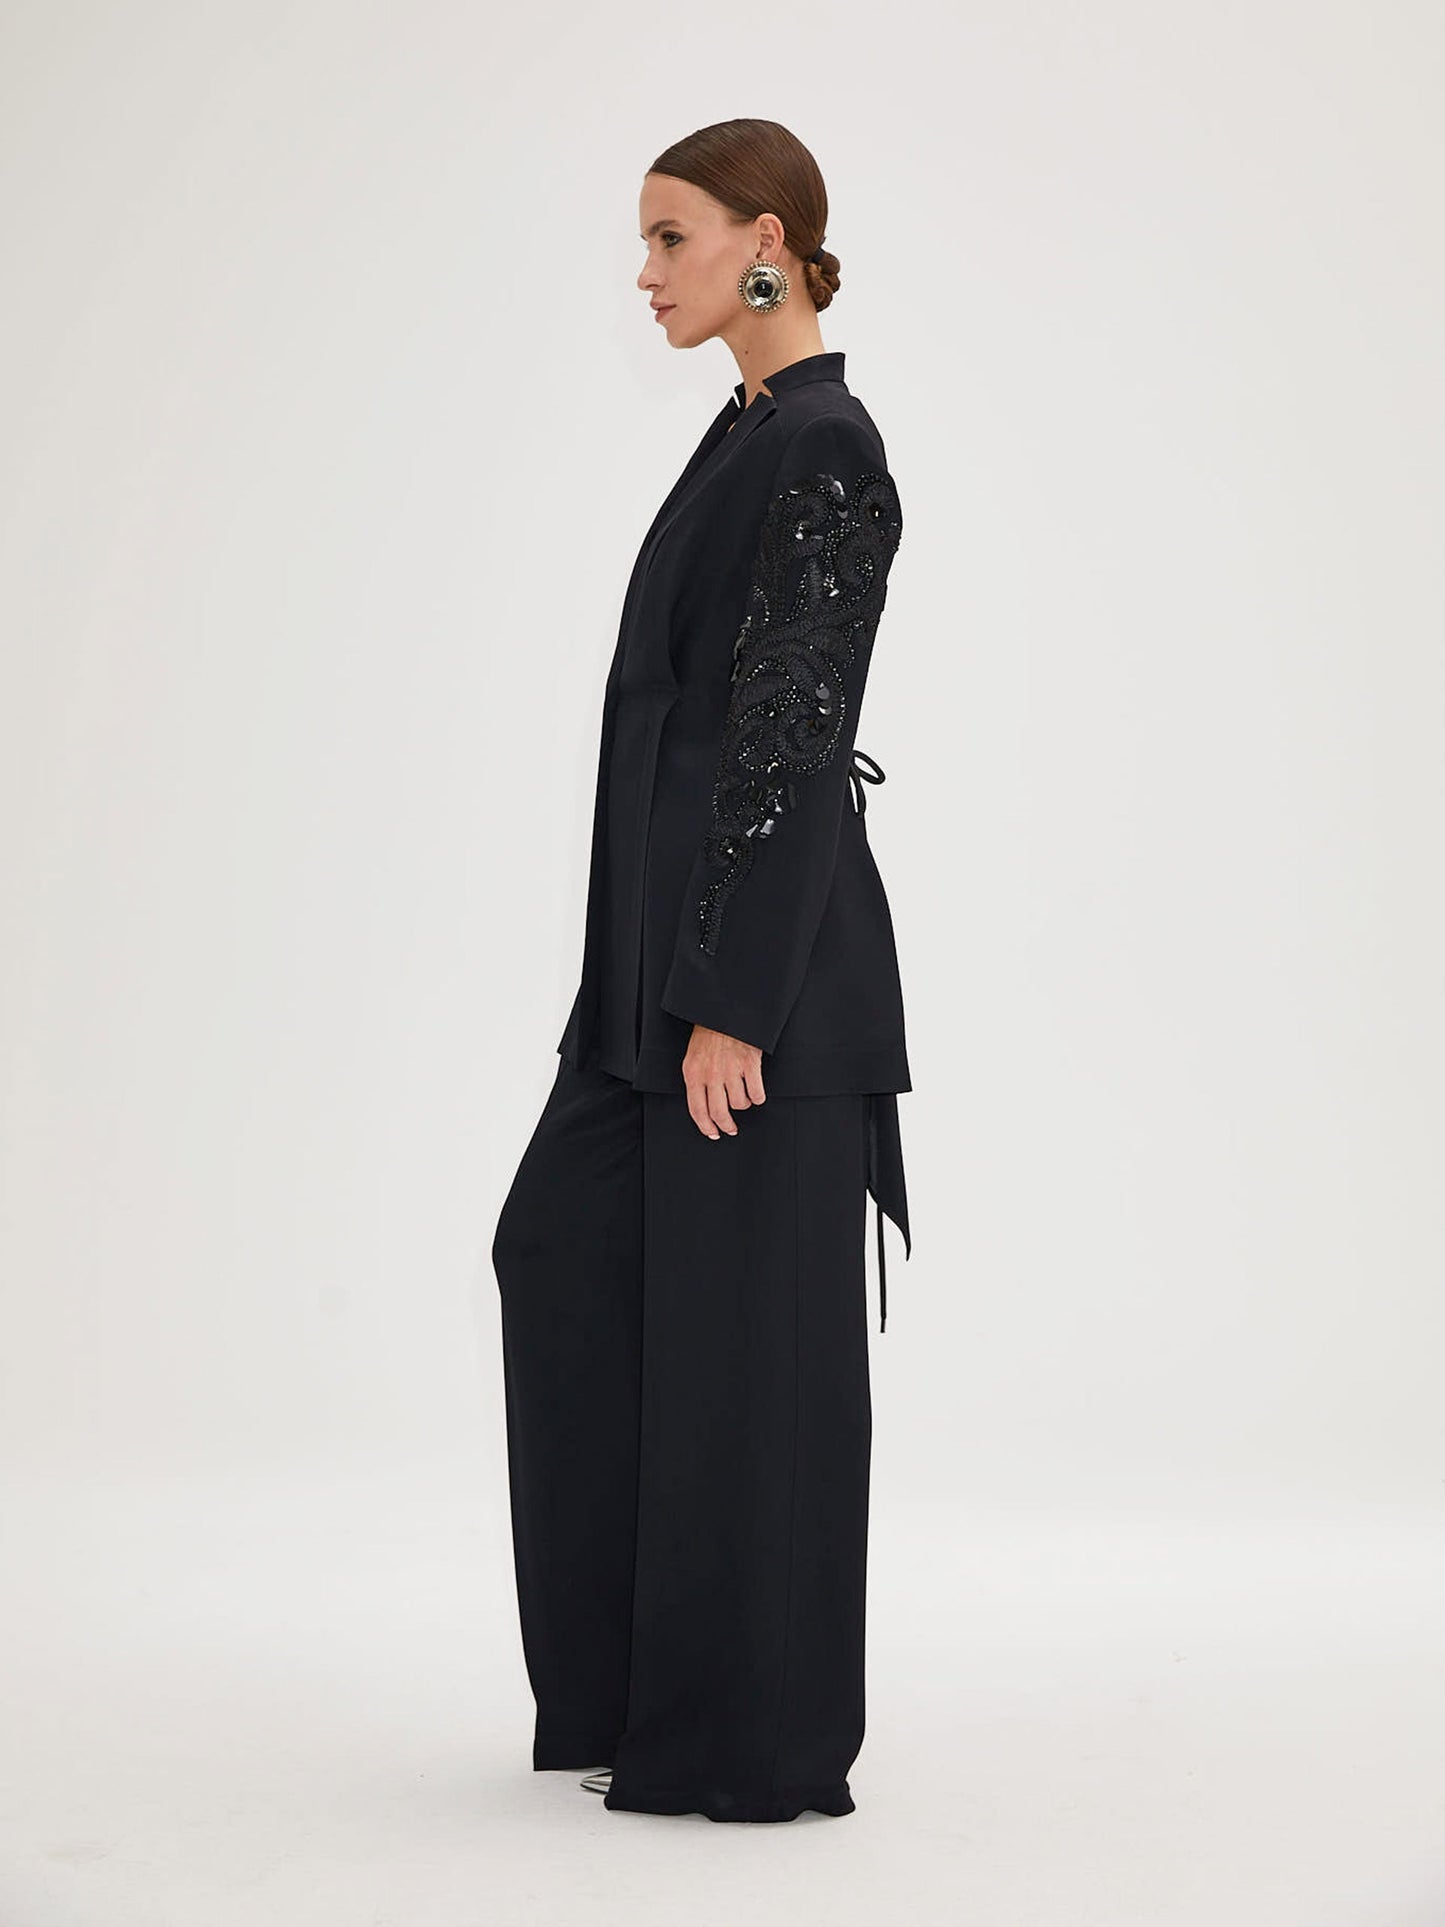 Black Jacket with Embroidered Sleeves